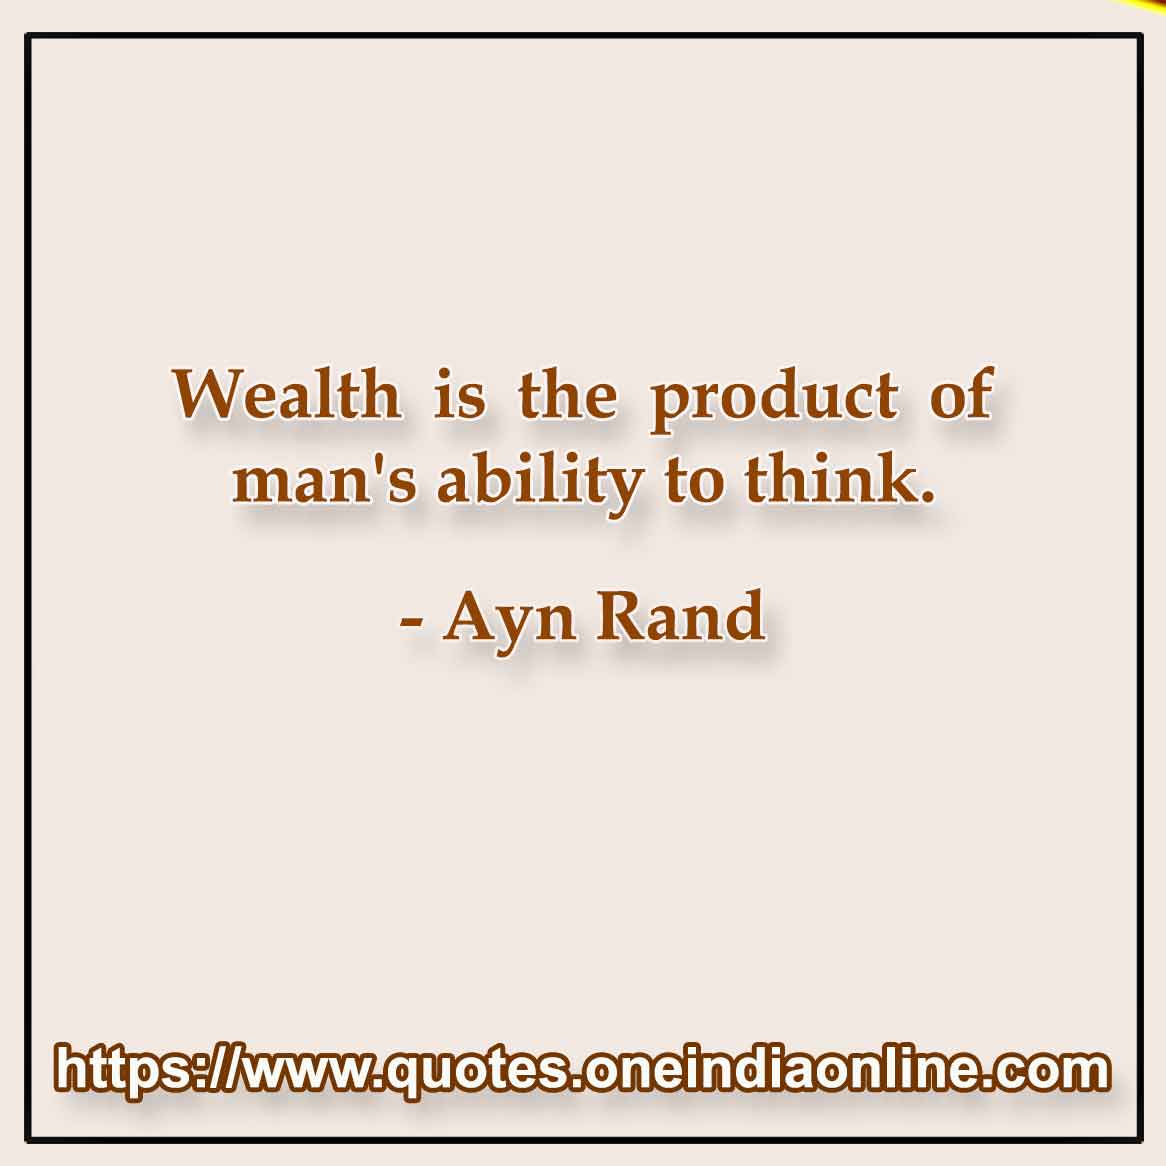 Wealth is the product of man's ability to think. 

- Whatsapp Status Quotes in English by Ayn Rand